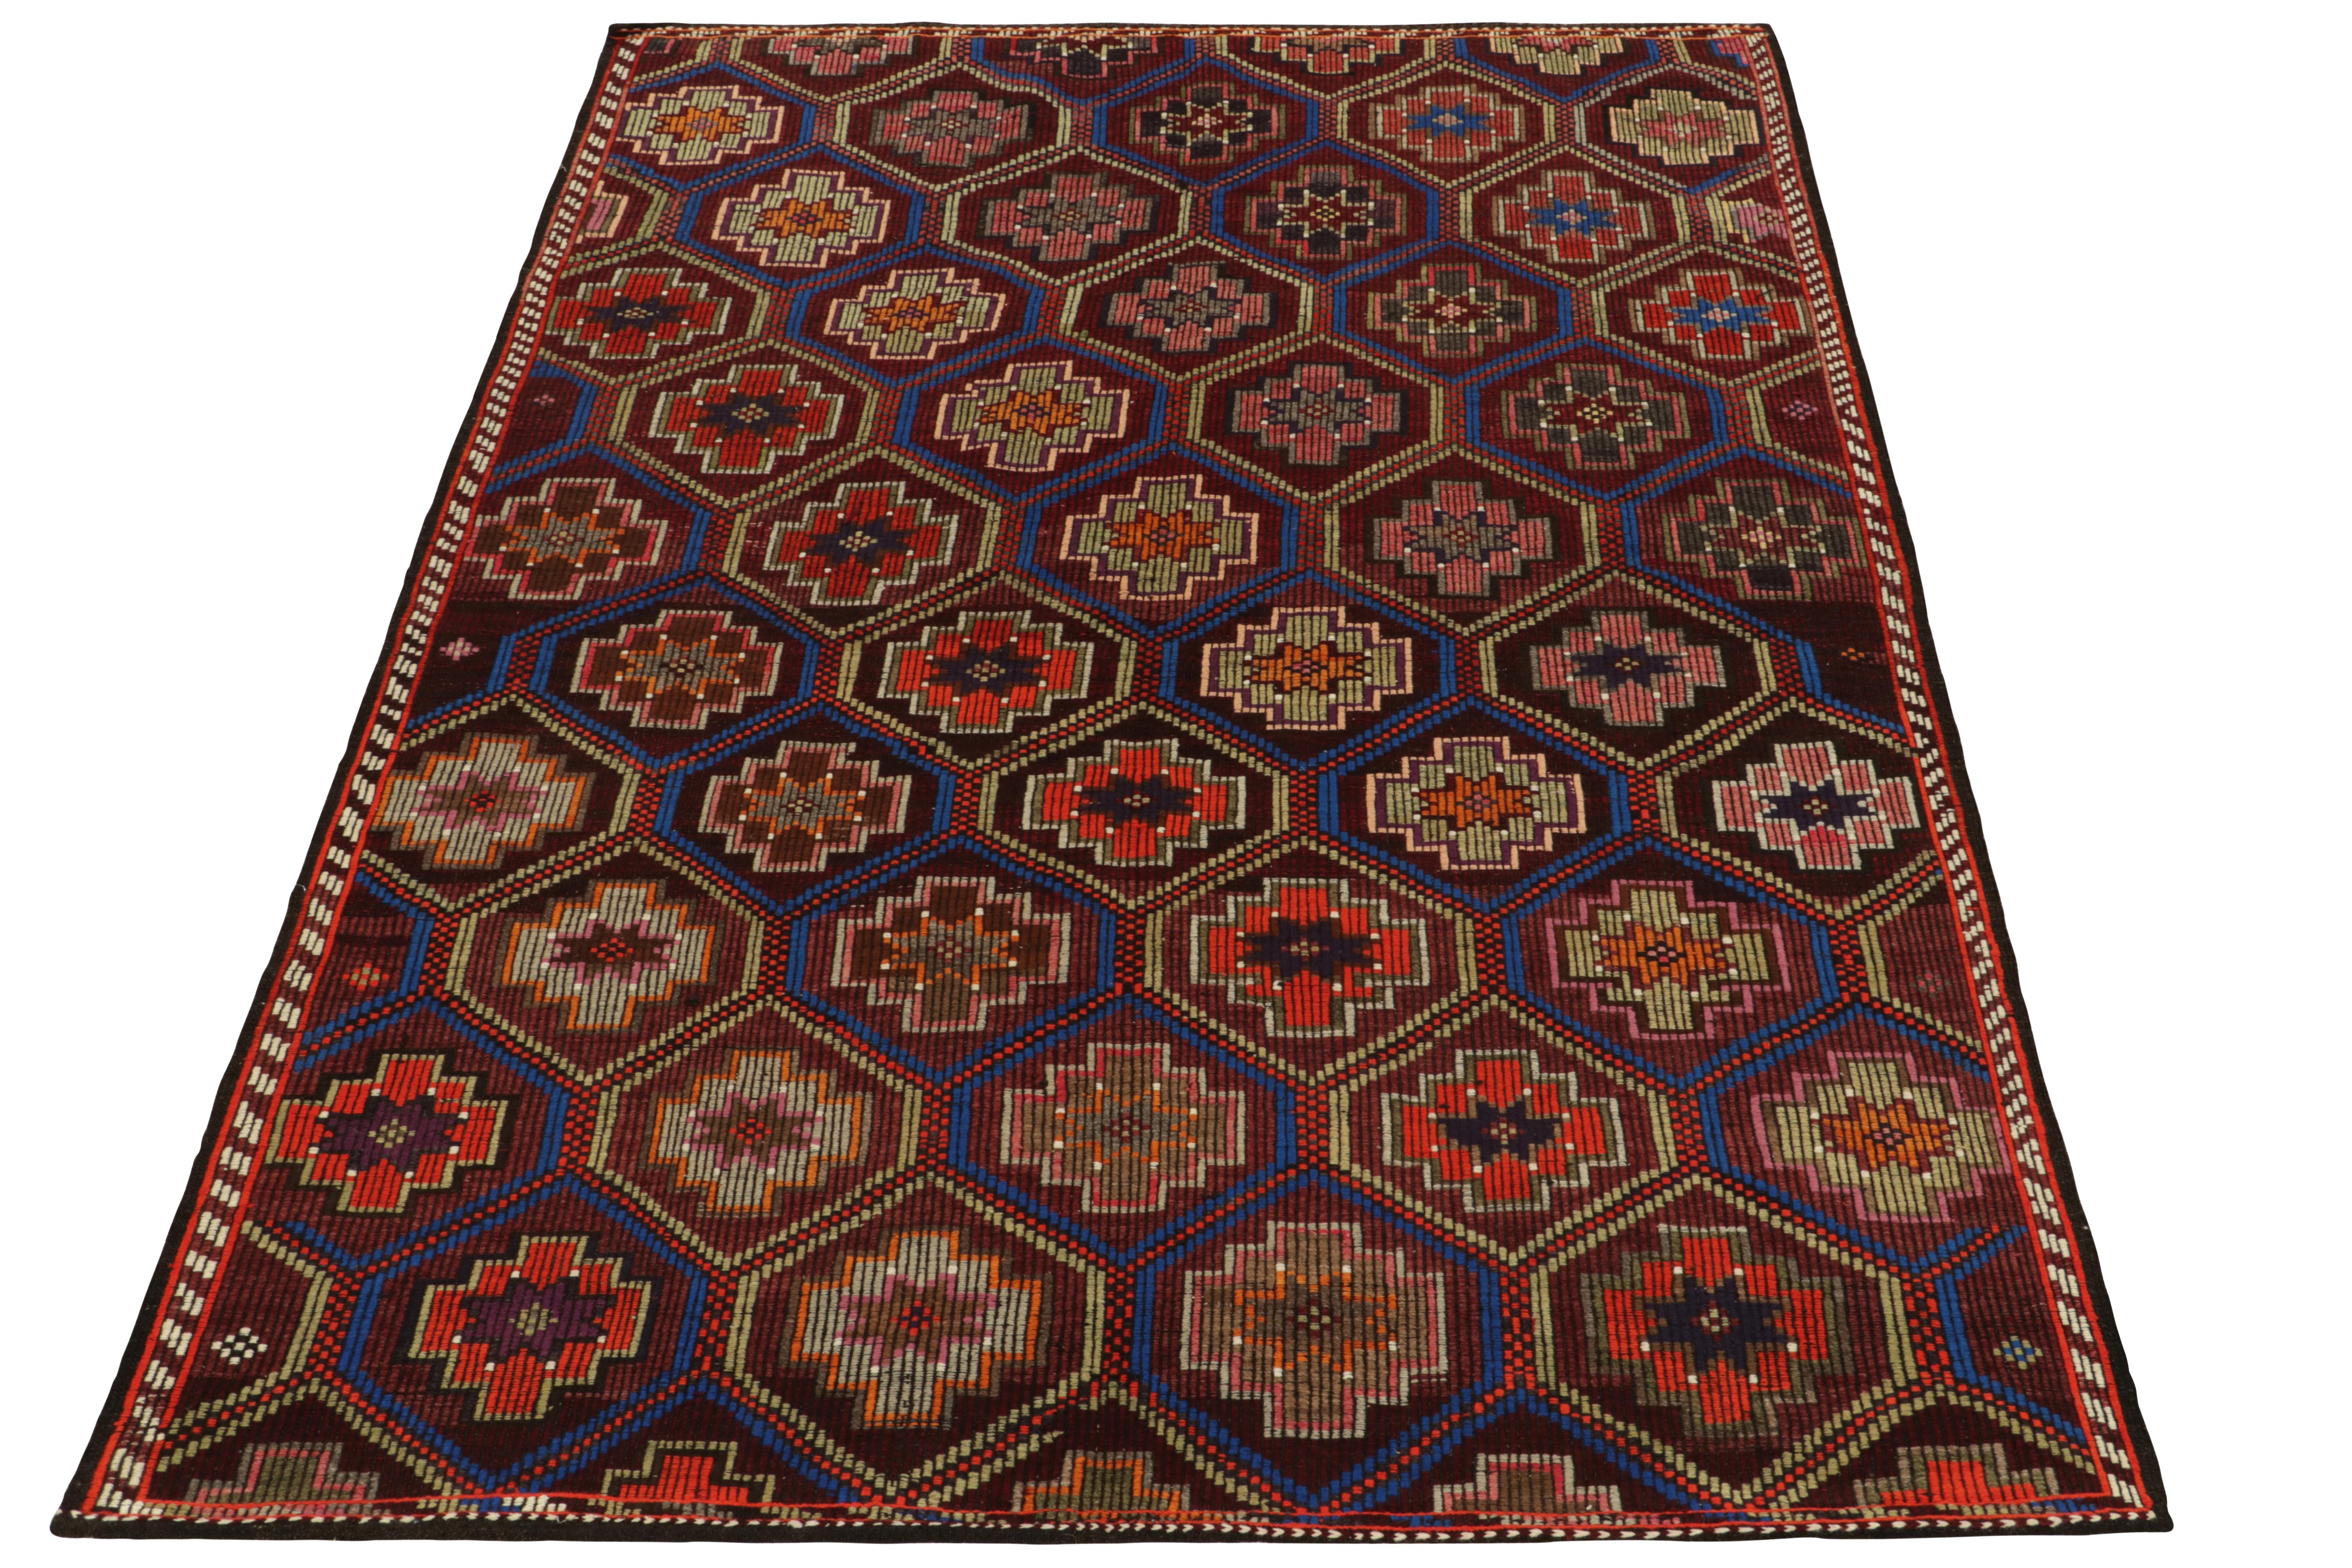 Carrying rich Kurdish inspiration, a vintage Cecim kilim rug entering our flat weave collection. This 6x10 creation from the Anatolian lineage revels in impeccable embroidery & detailing in design. Reading on the tribal sensibilities of the 1950s,